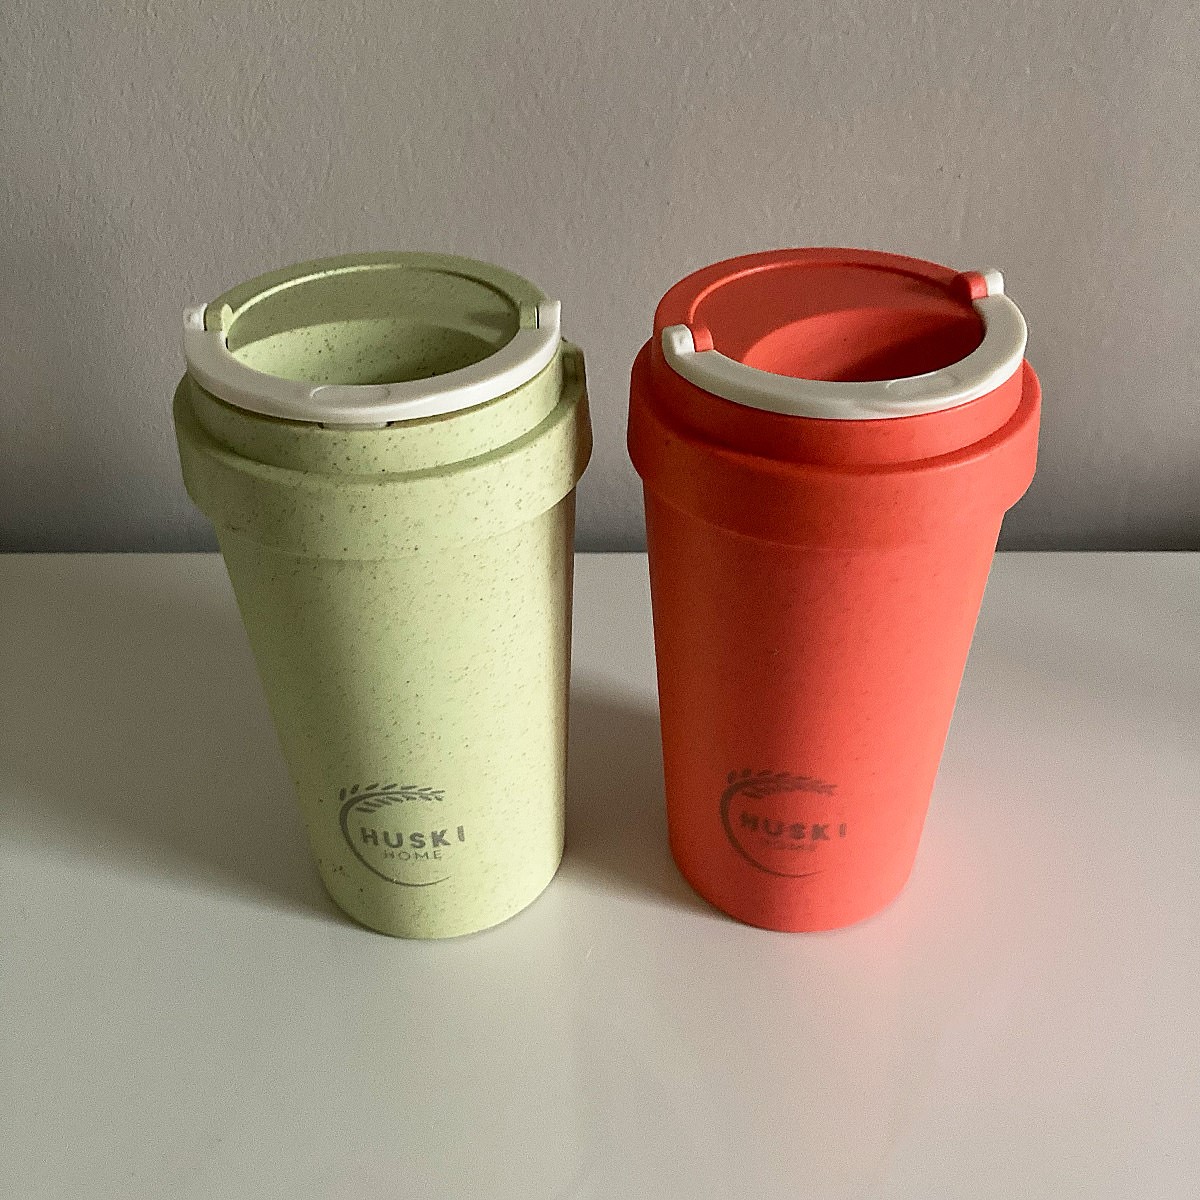 Superfried – Walk the Talk. Testing eco friendly reusable cups – Huski cups. Continuing my path towards eco living.